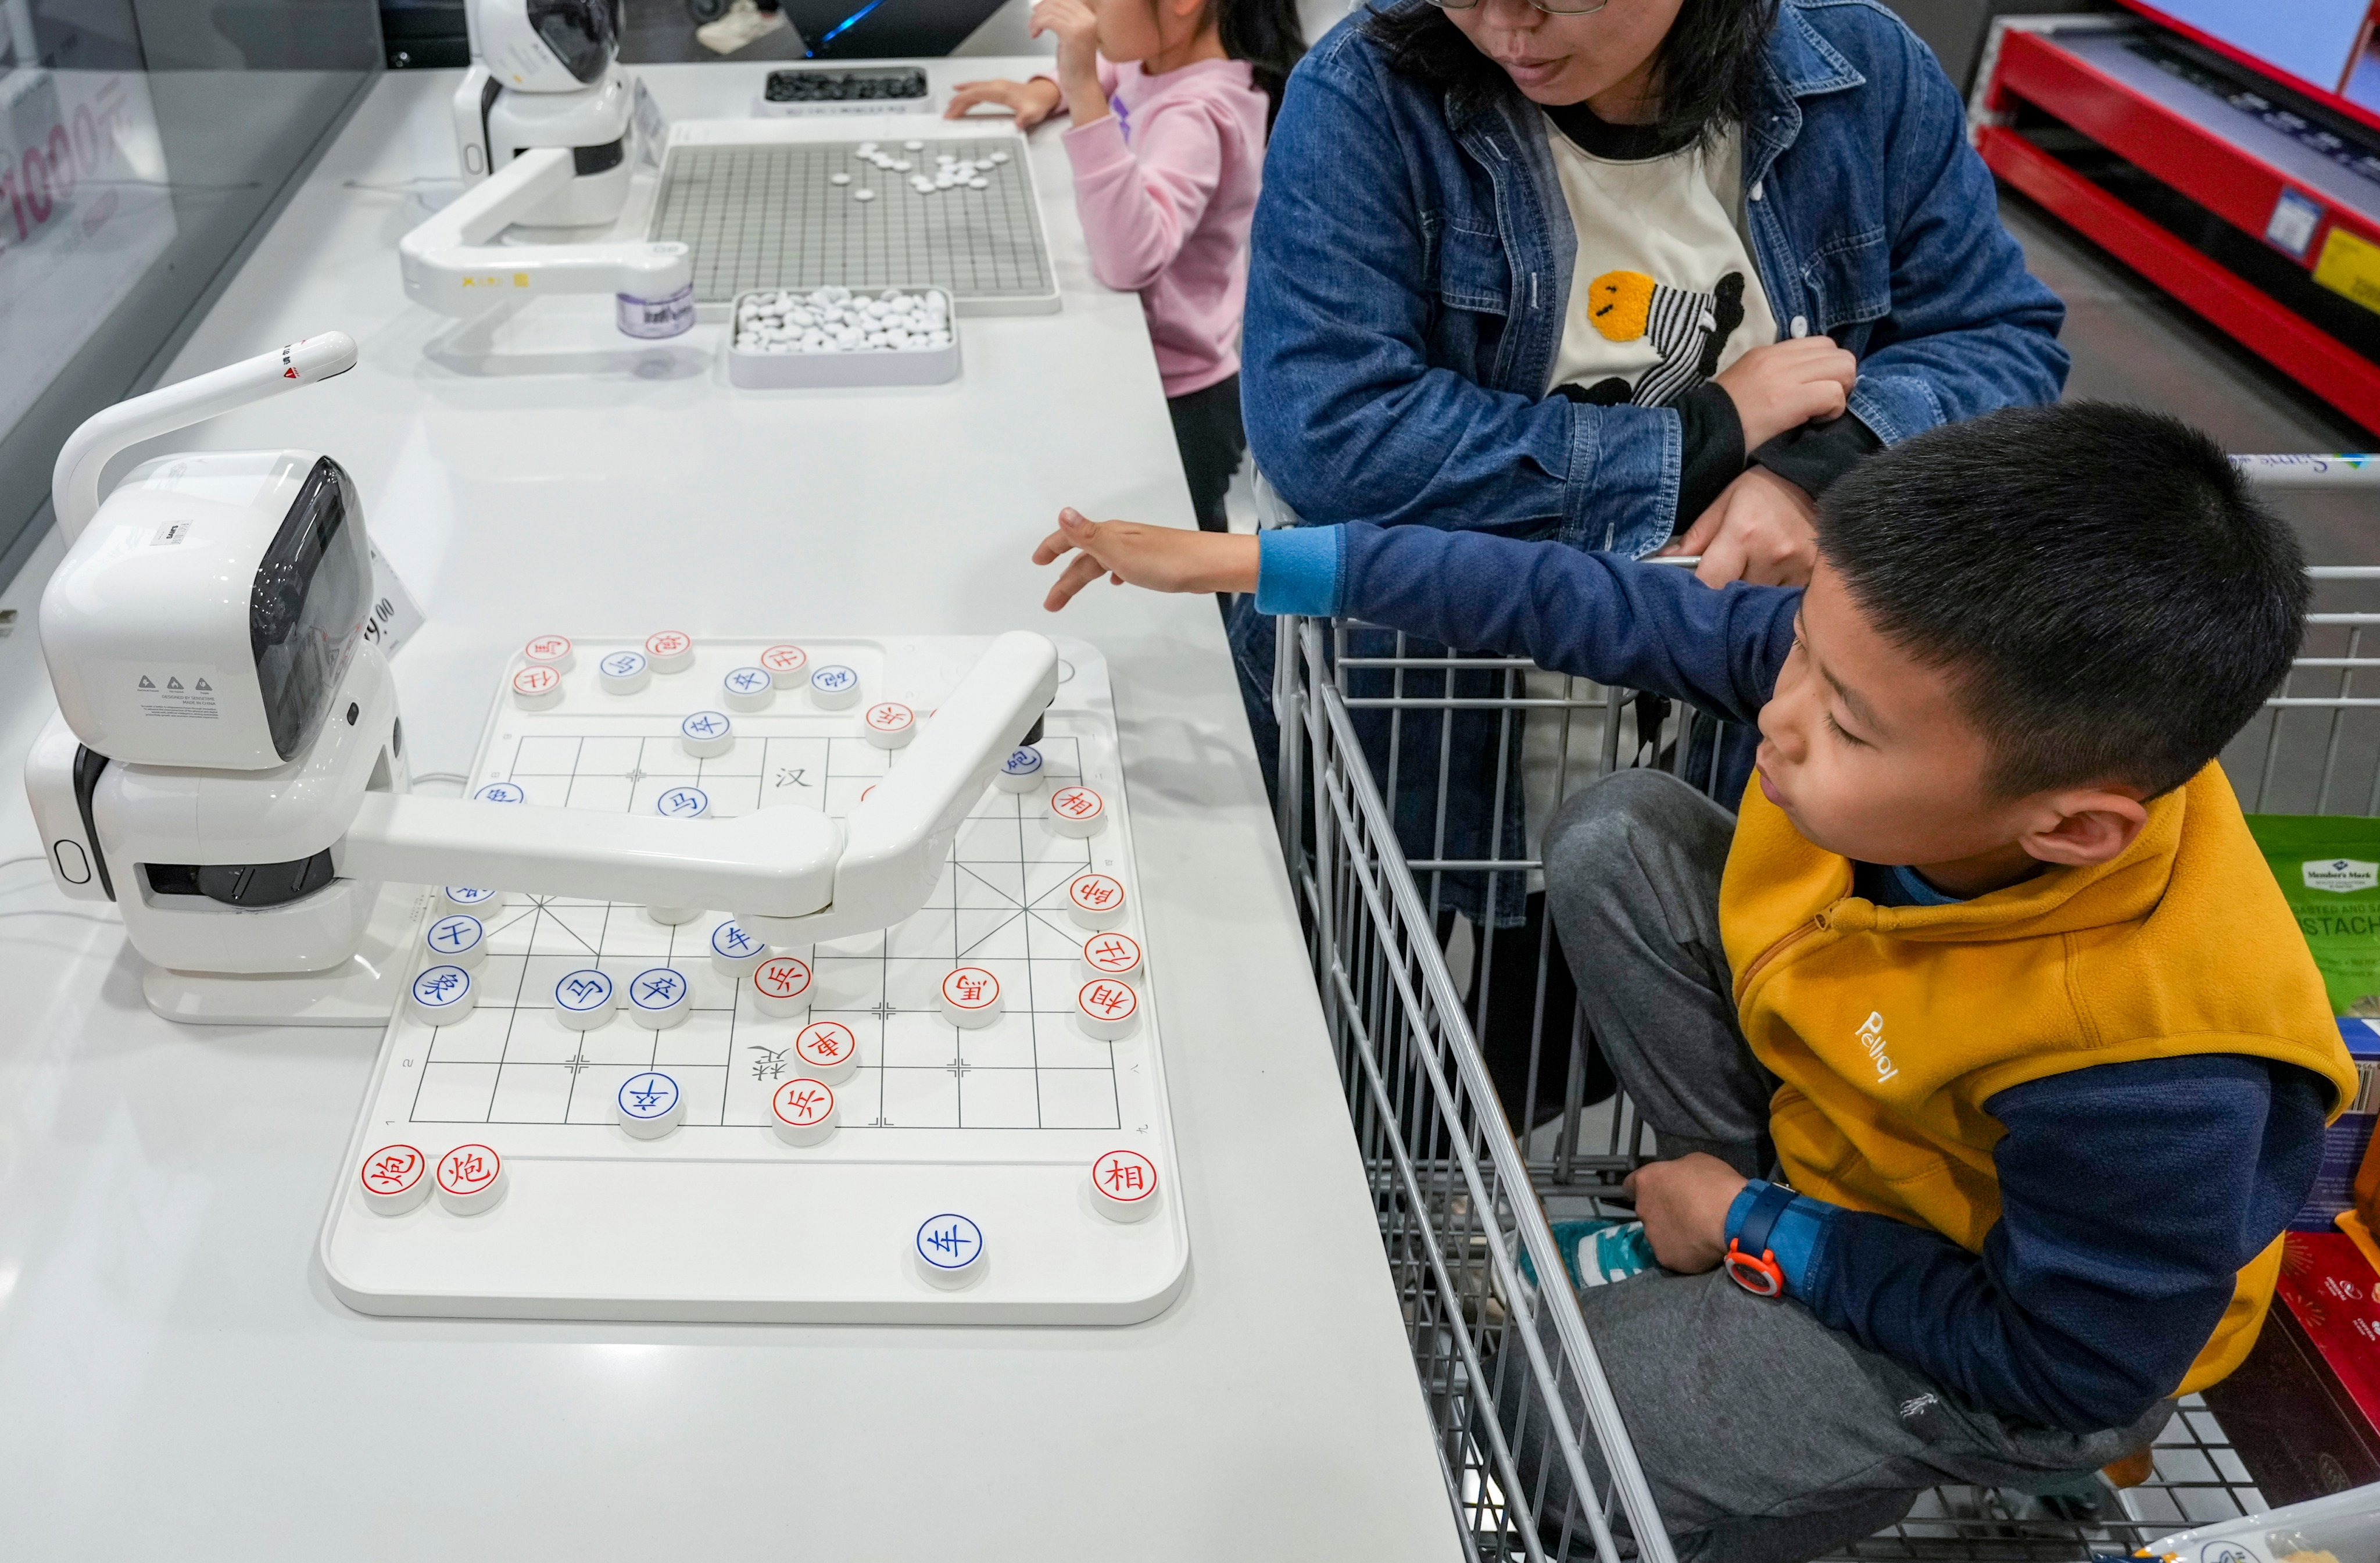 A boy plays chess with a robotic arm powered by artificial intelligence at a Sam’s Club in Qianhai, Shenzhen, on January 7. While Hongkongers are showing great interest in heading north to shop in megastores, Shenzhen also offers some lessons in urban planning. Photo: Eugene Lee